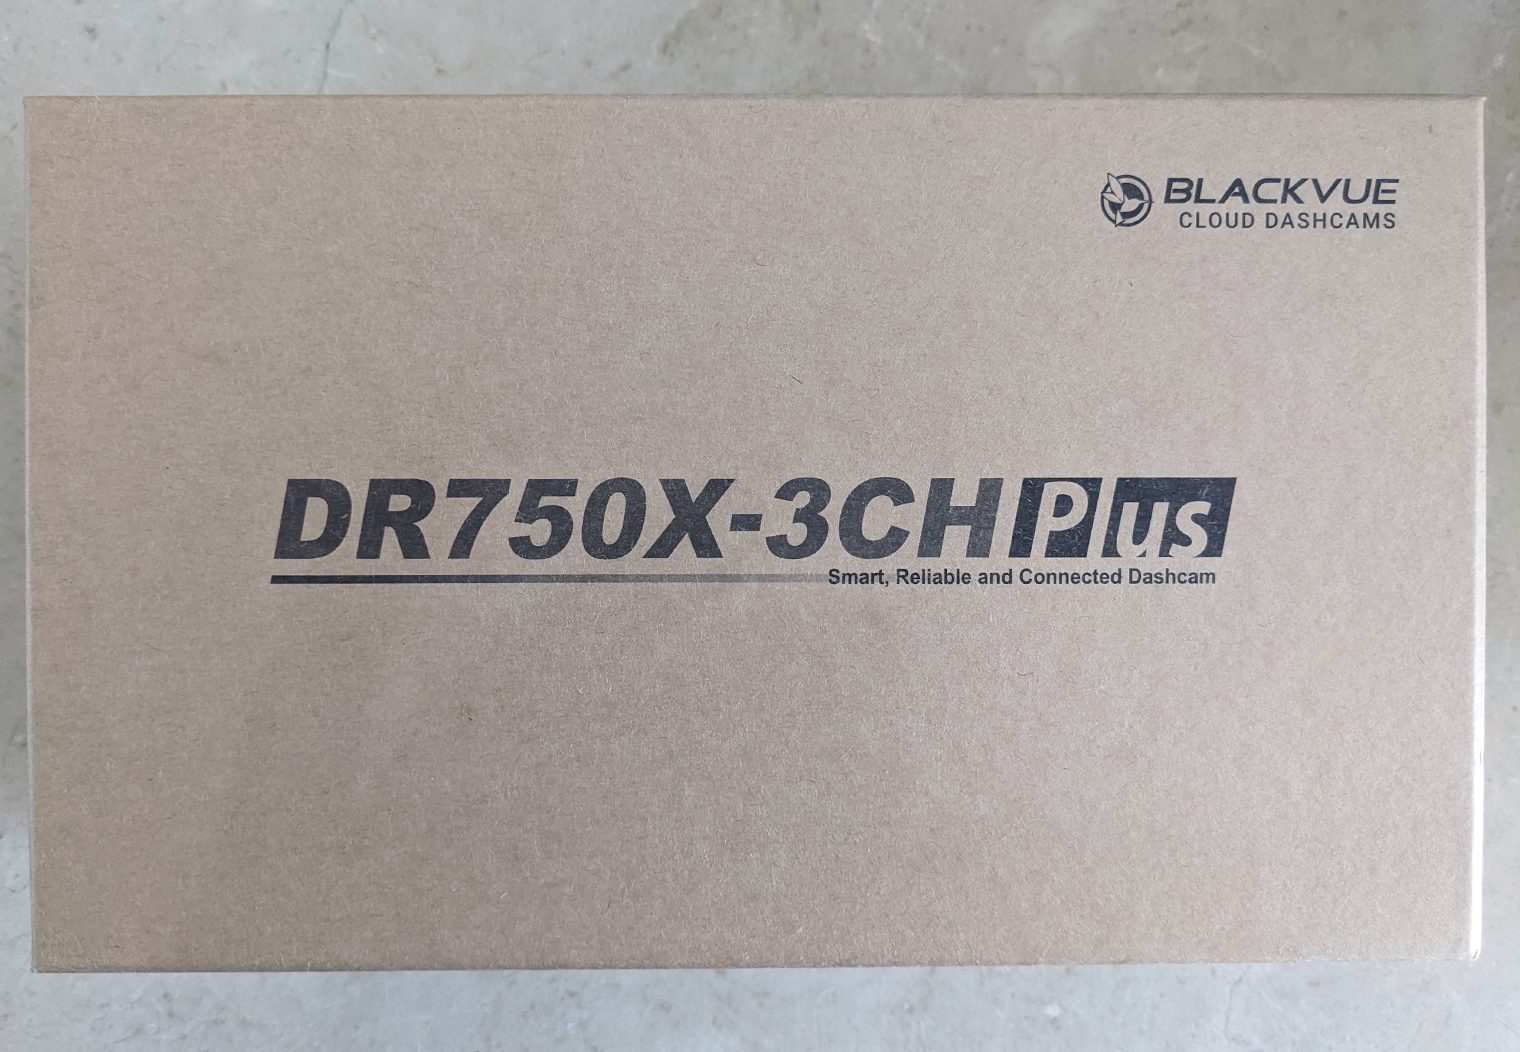 BlackVue DR750X-3CH backup camera in packaging before opening fro review